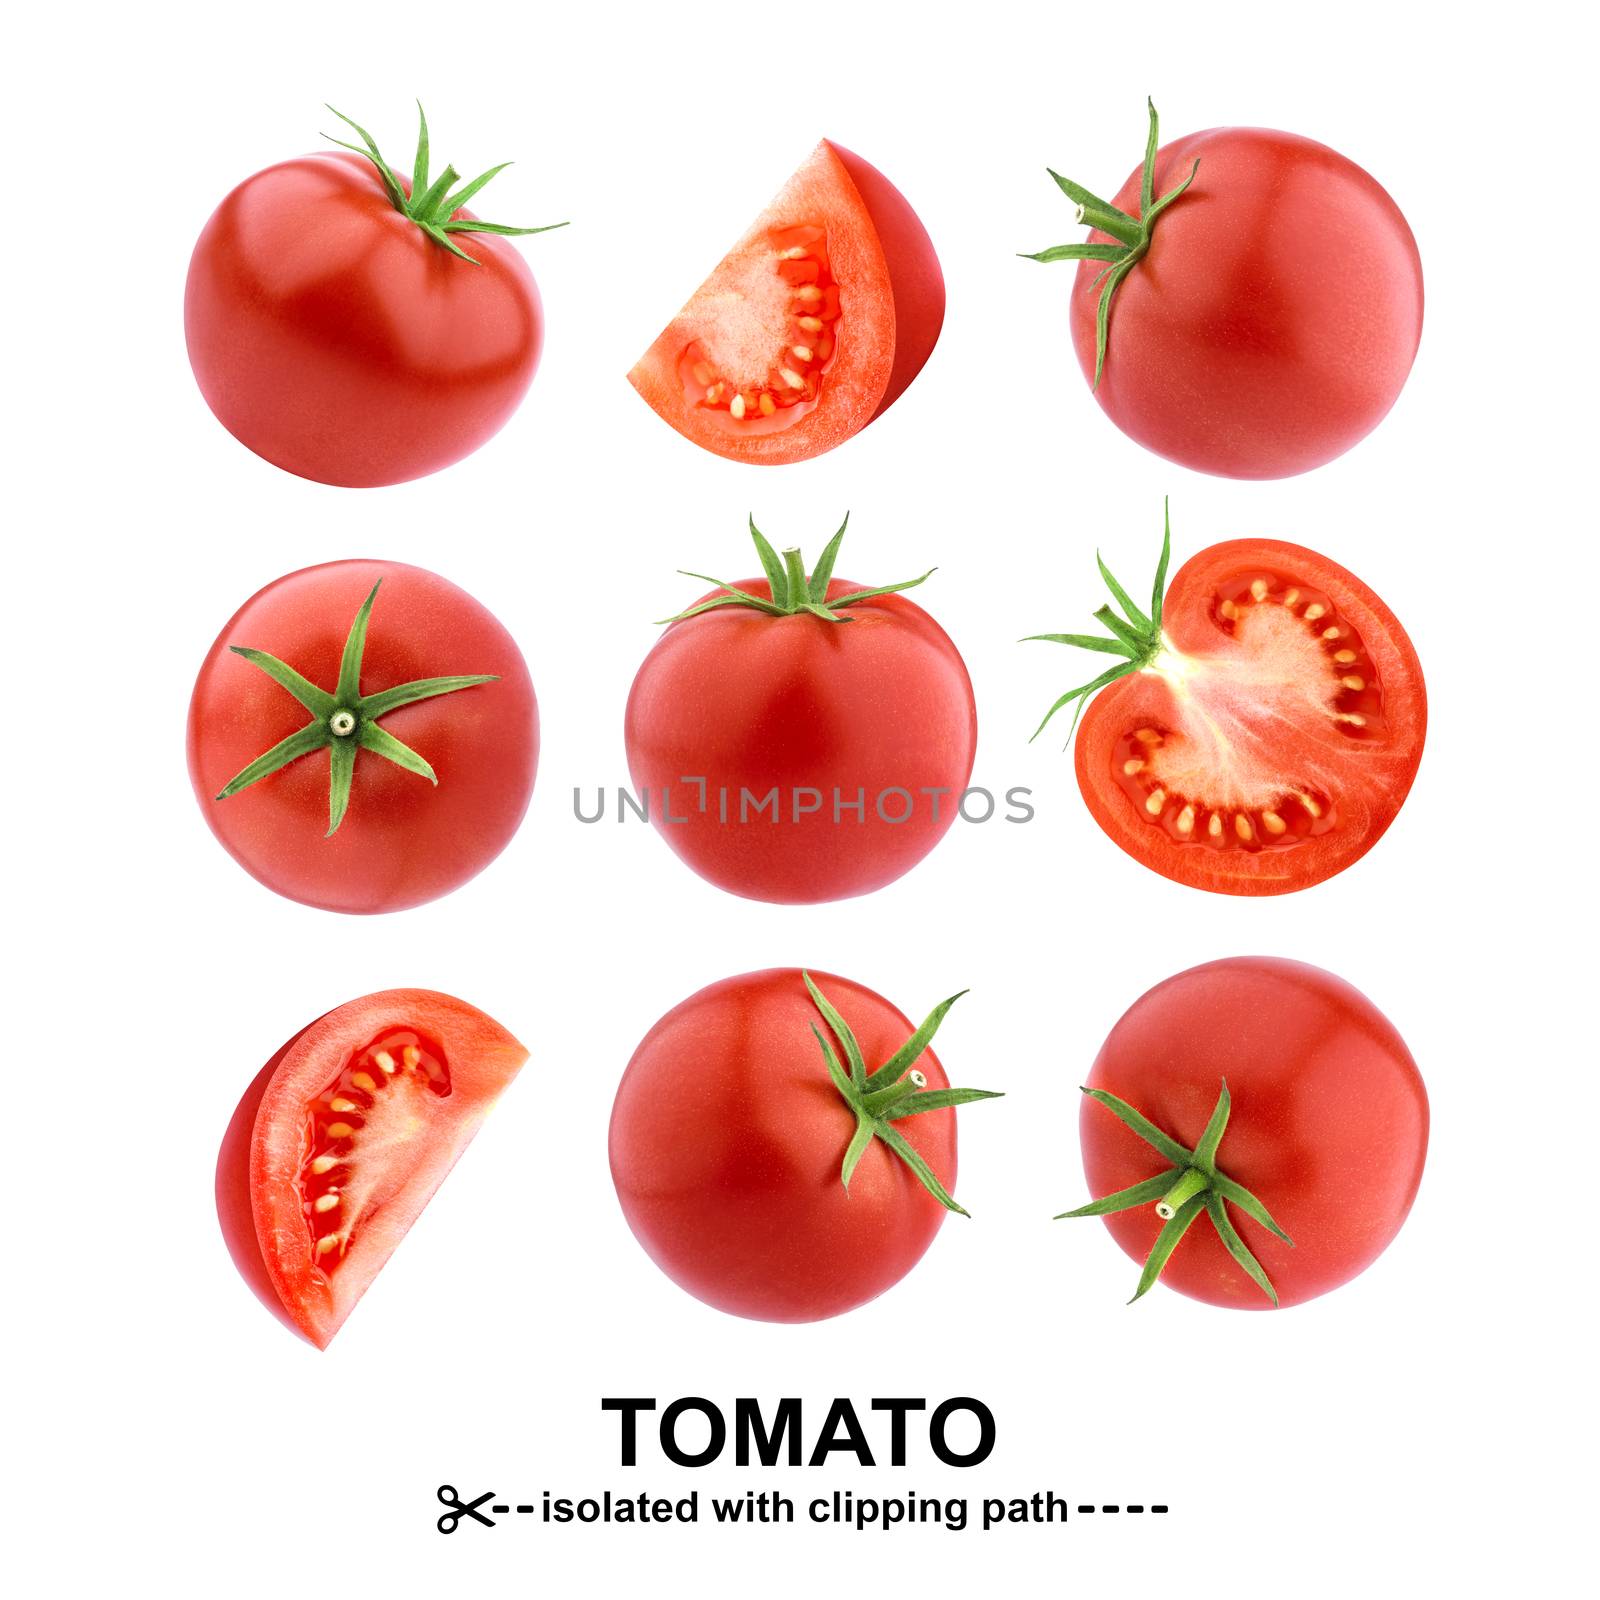 Tomatoes isolated on white background with clipping path. Collection by xamtiw